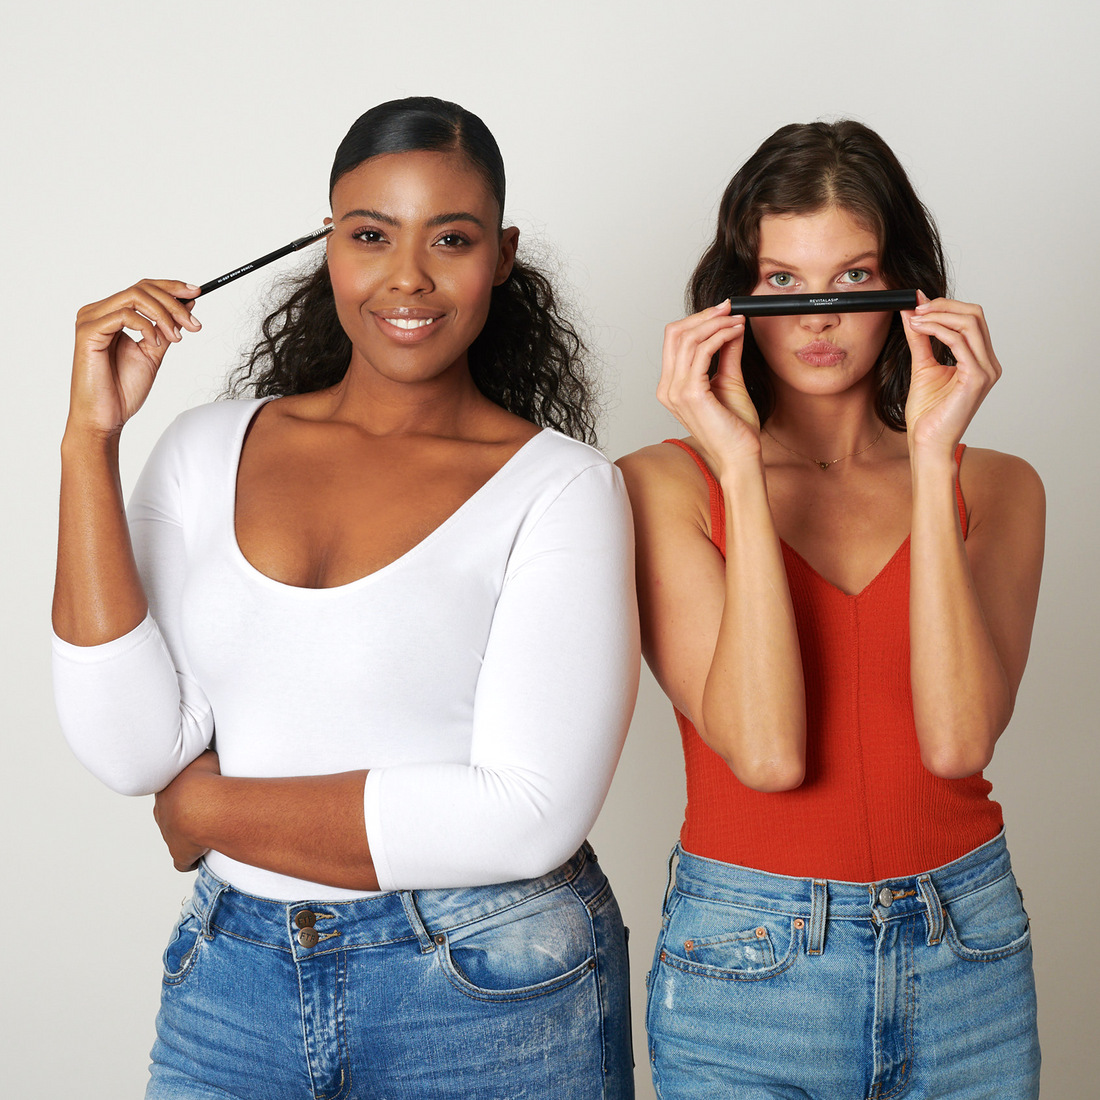 Image of model Alexus holding Hi-Def Brow Pencil and Kimee holding Double-Ended Volume Set